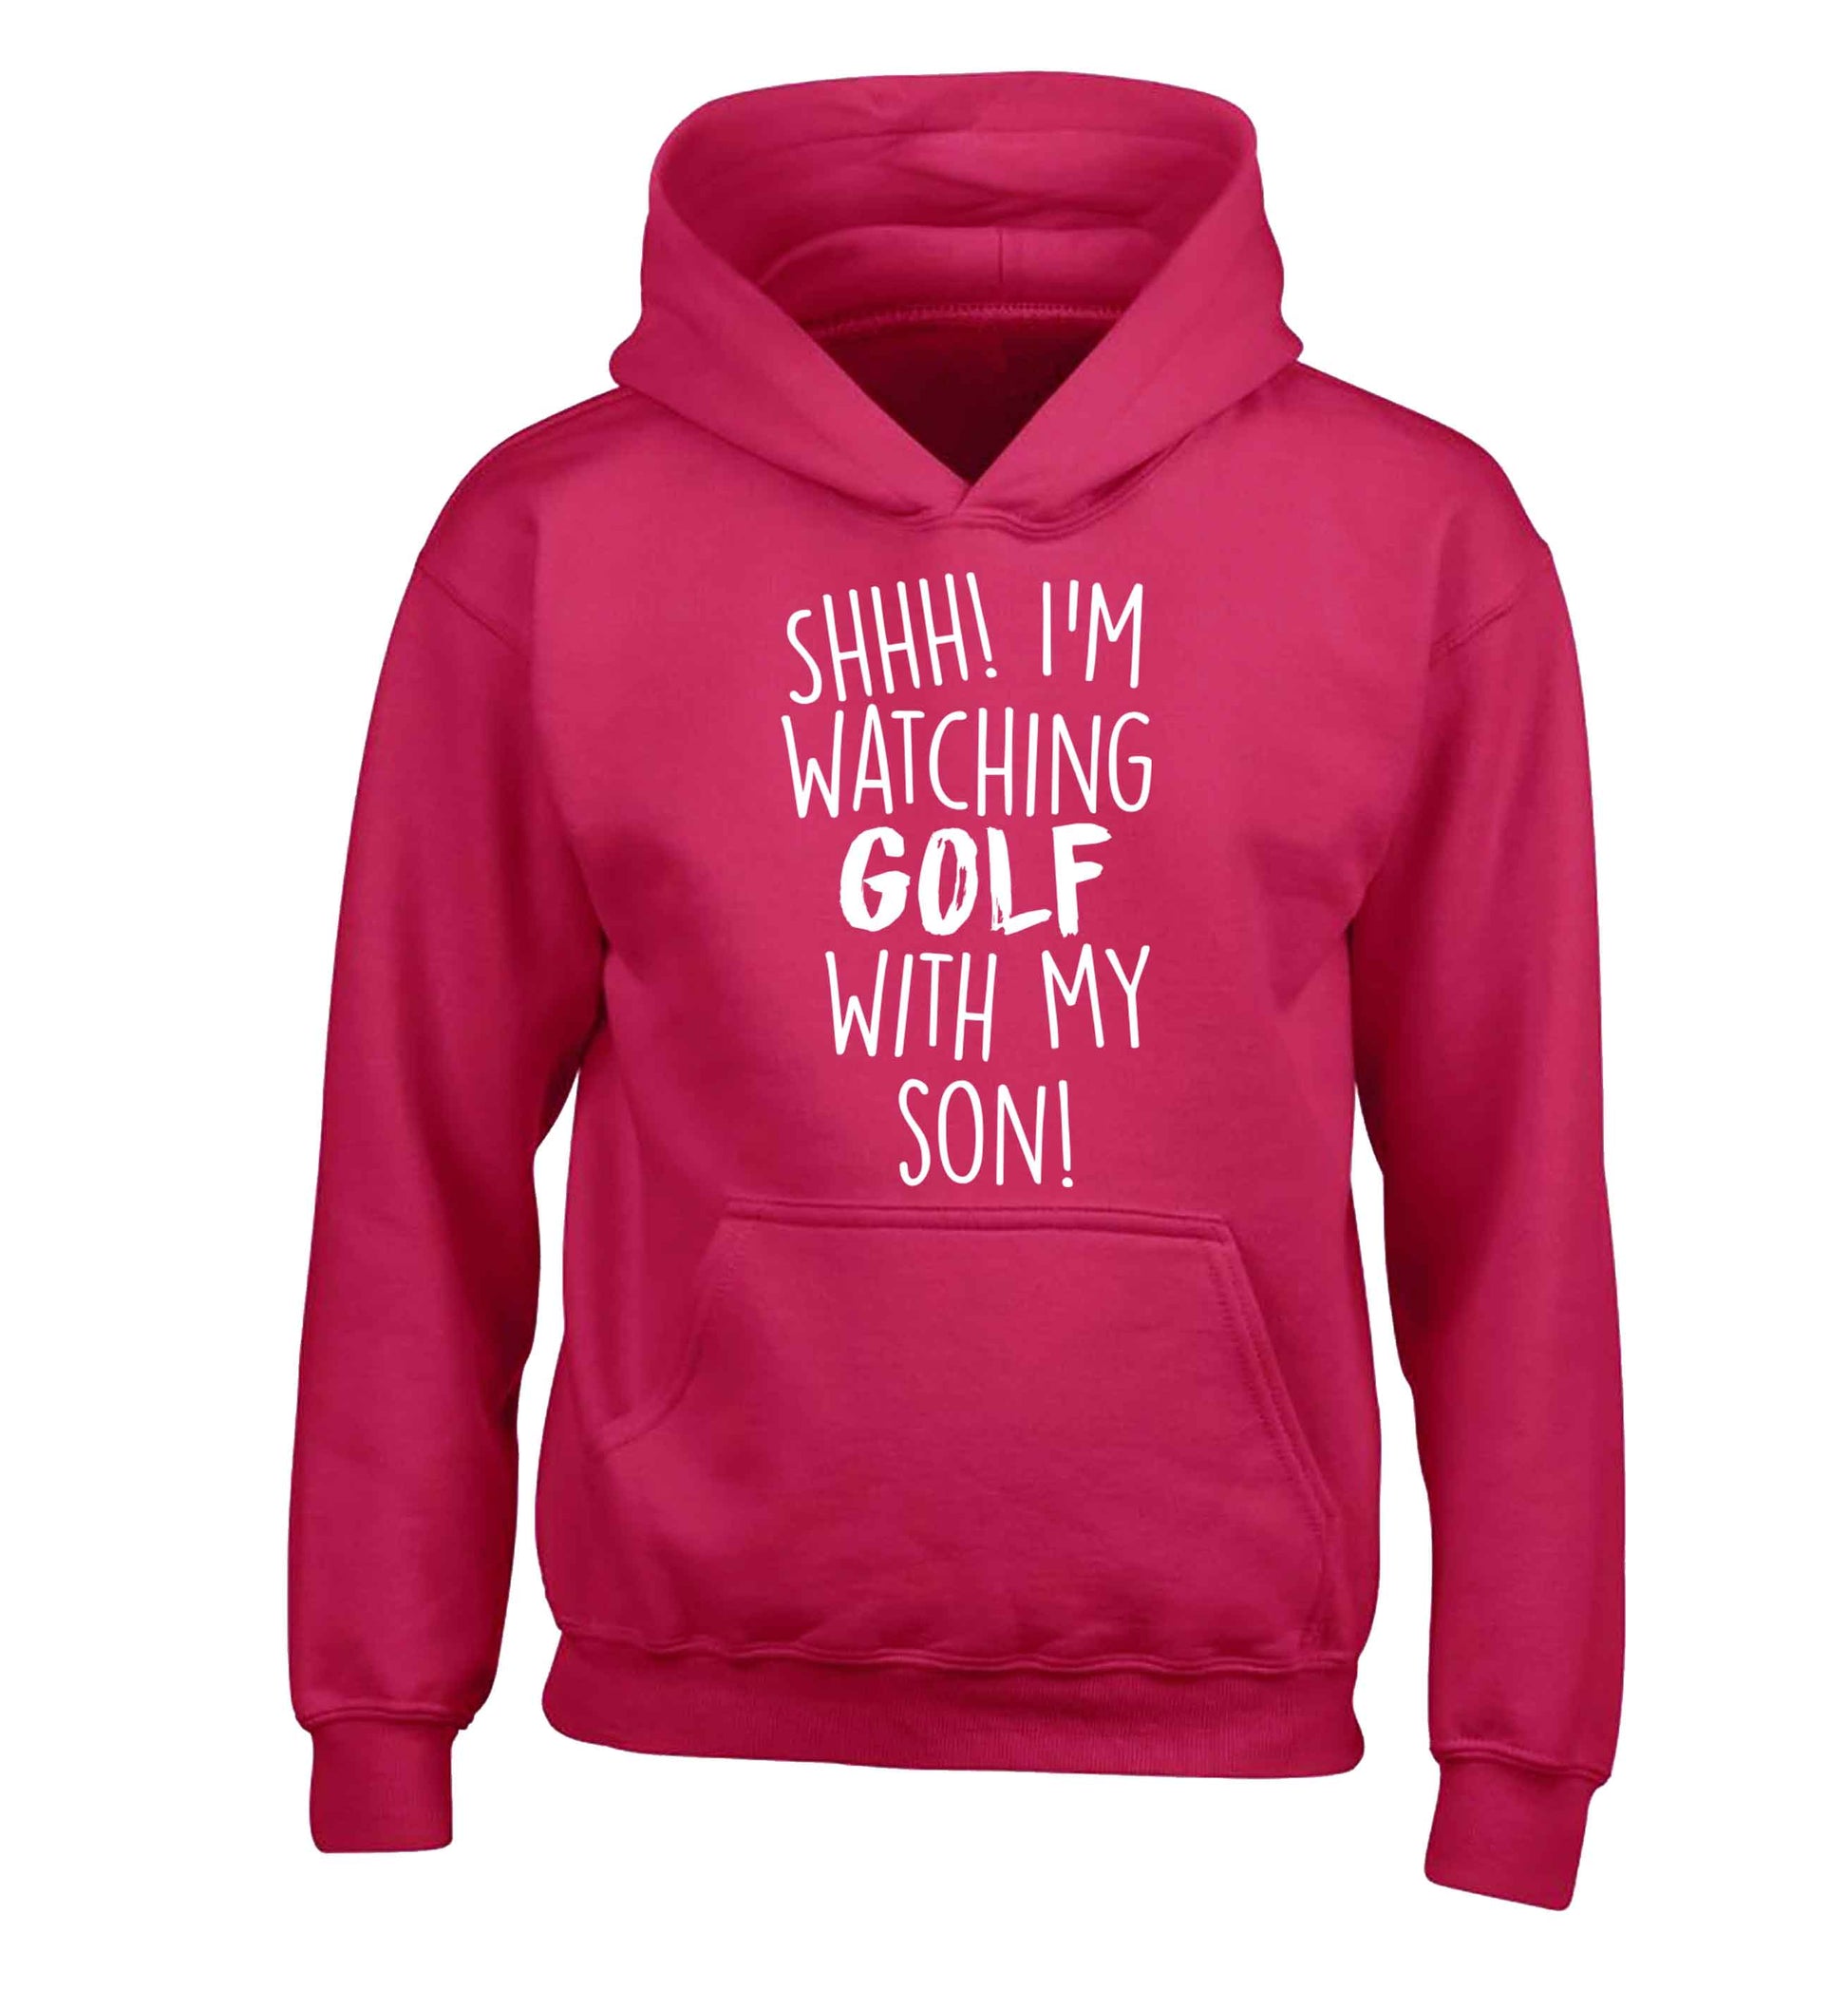 Shh I'm watching golf with my son children's pink hoodie 12-13 Years